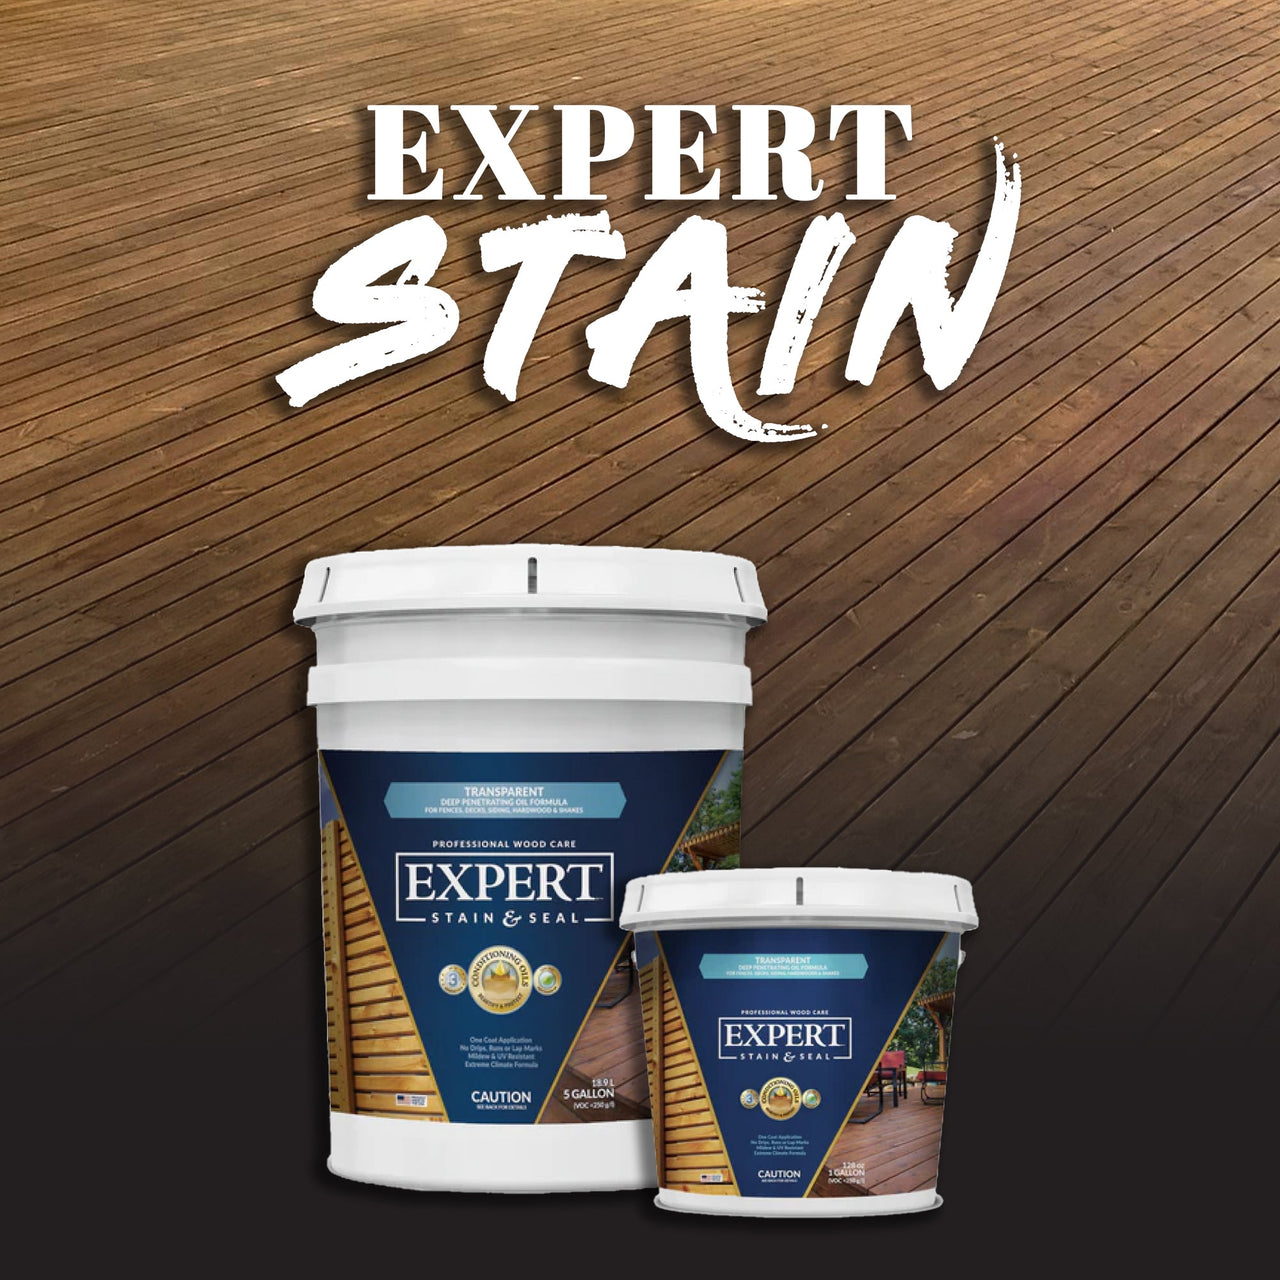 Expert Stain & Seal coating for decks and fences